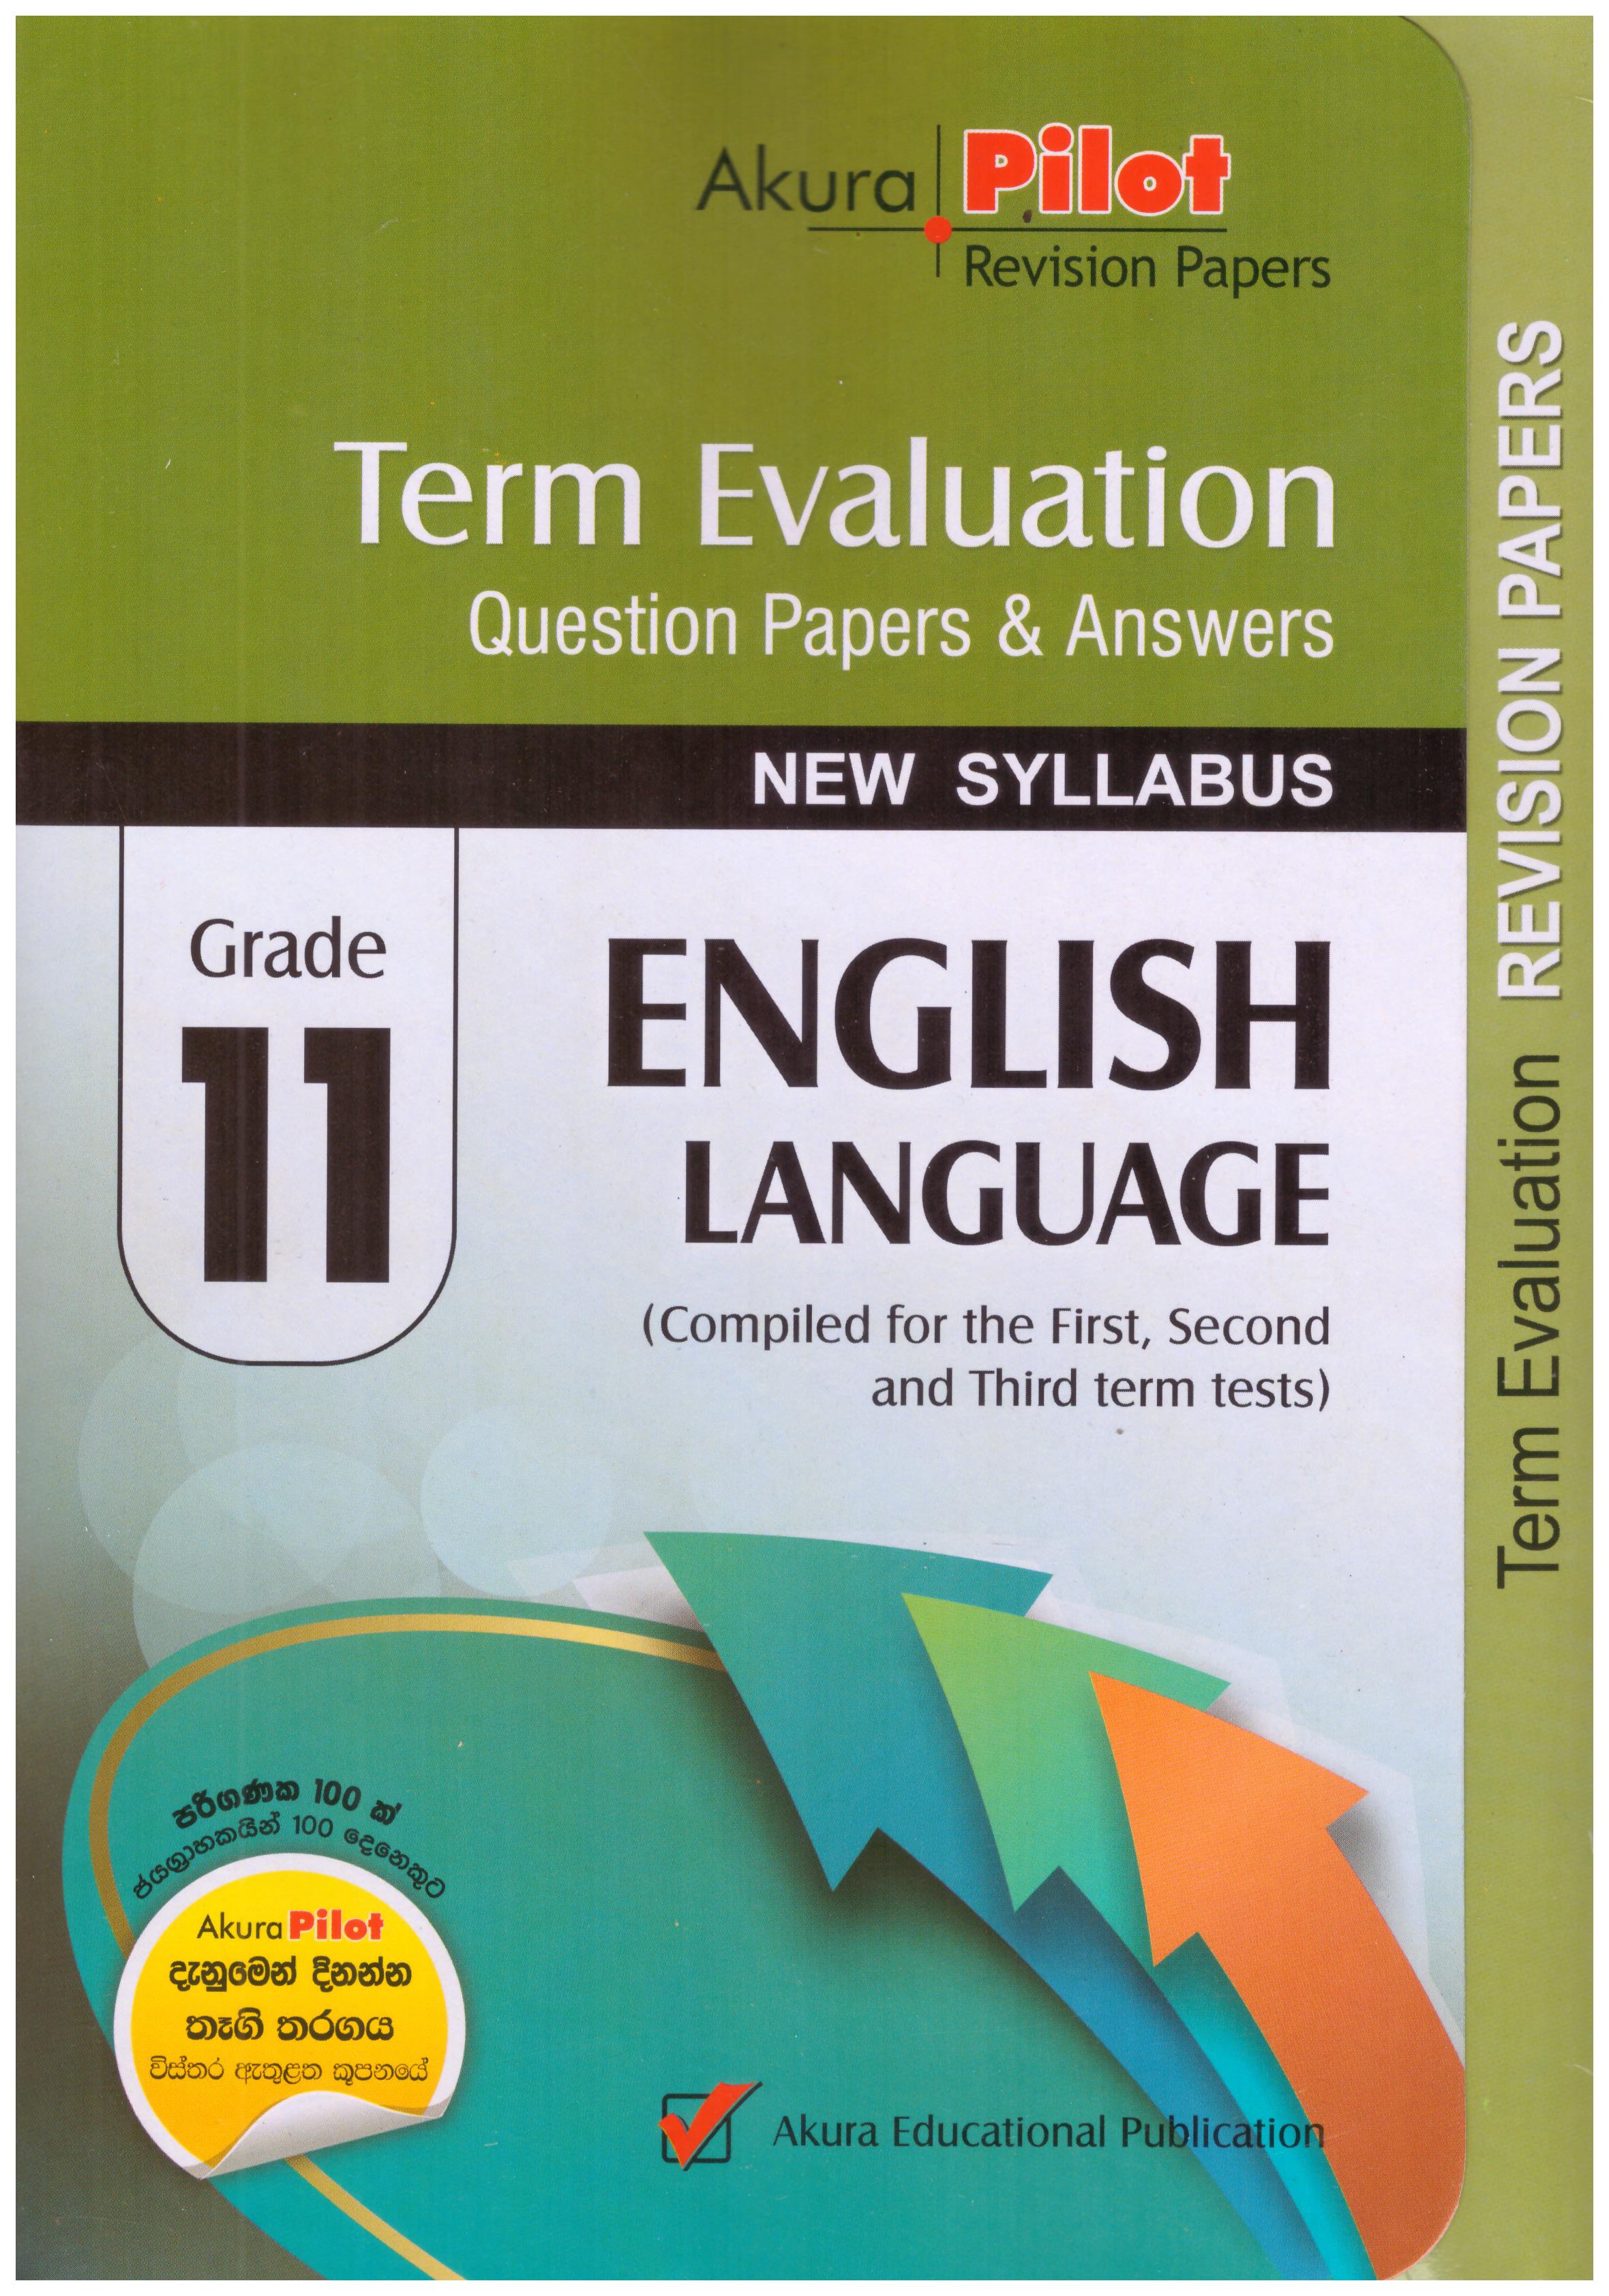 Akura Pilot Grade 11 Term Evaluation Question Papers and Answers English Language (New Syllabus)